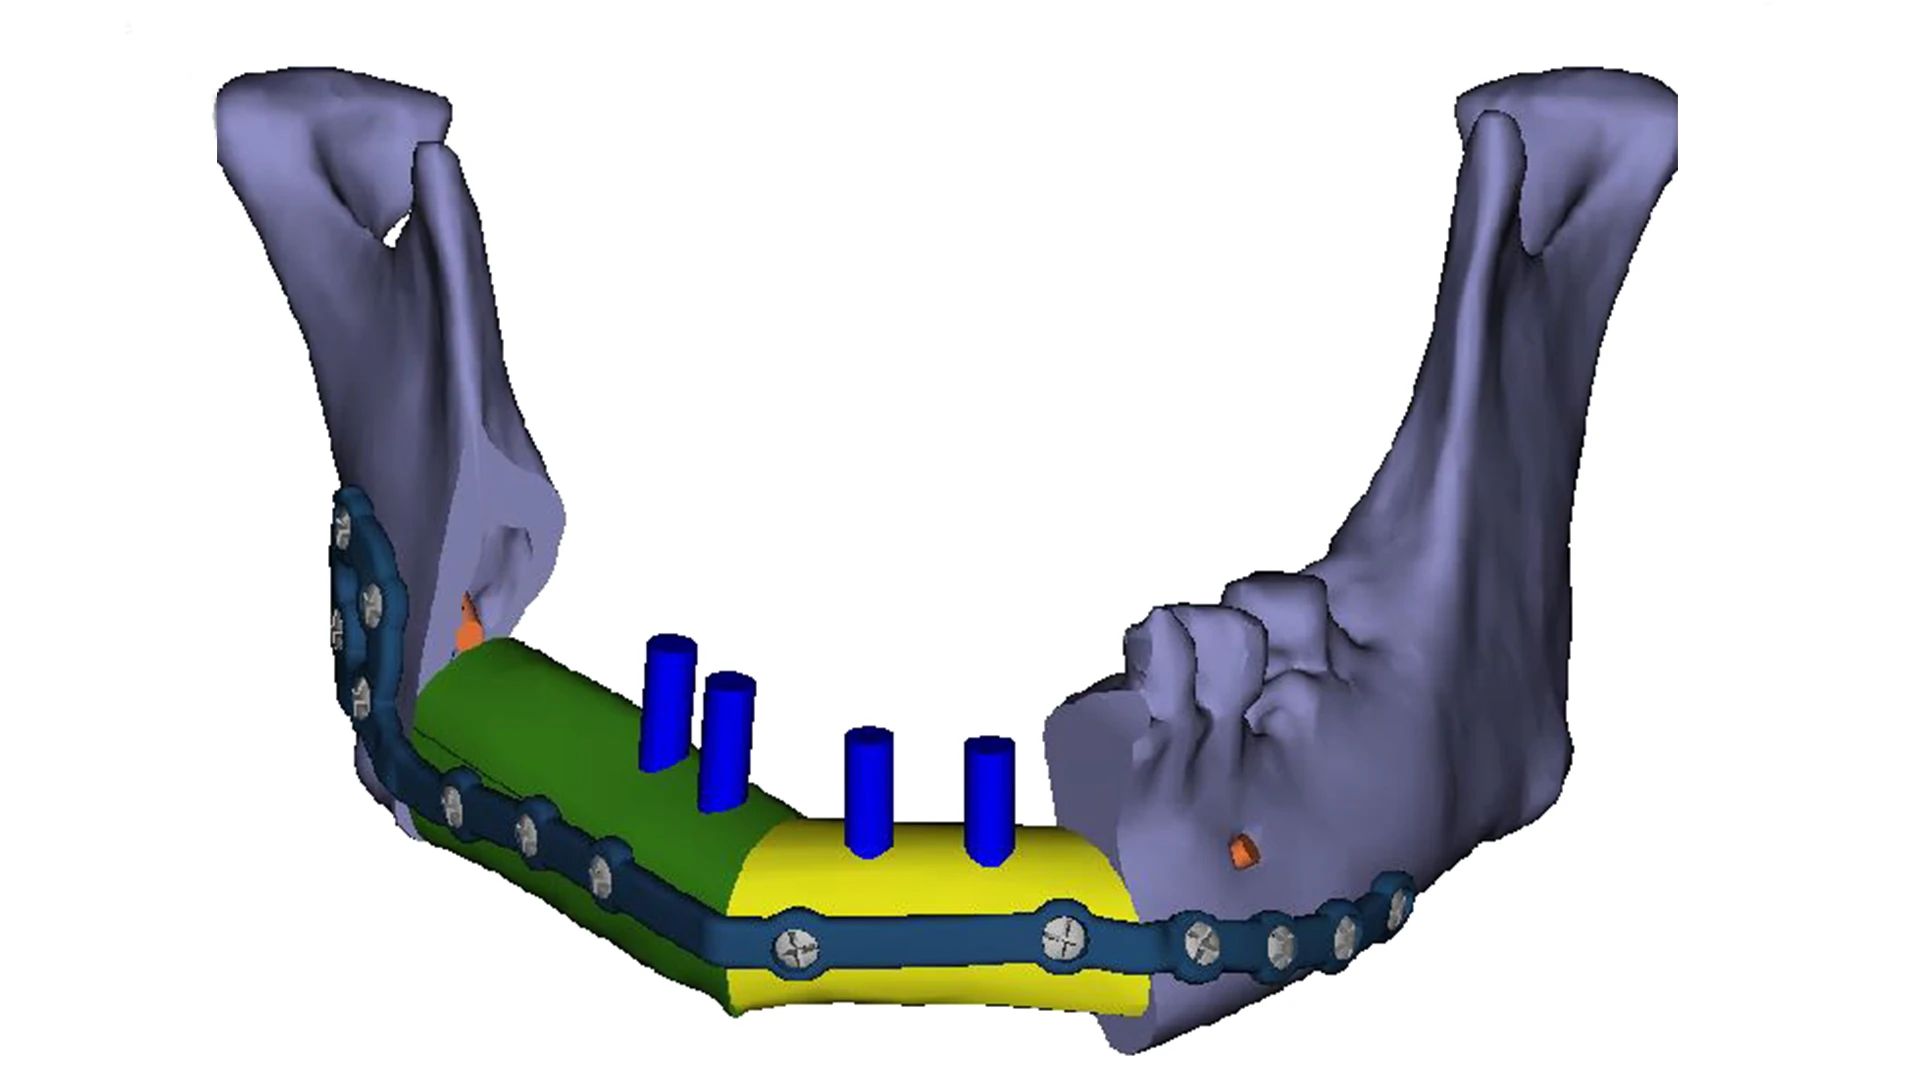 Planned reconstruction of the jaw using a vascularized fibula free flap (green and yellow) and dental implants (blue).